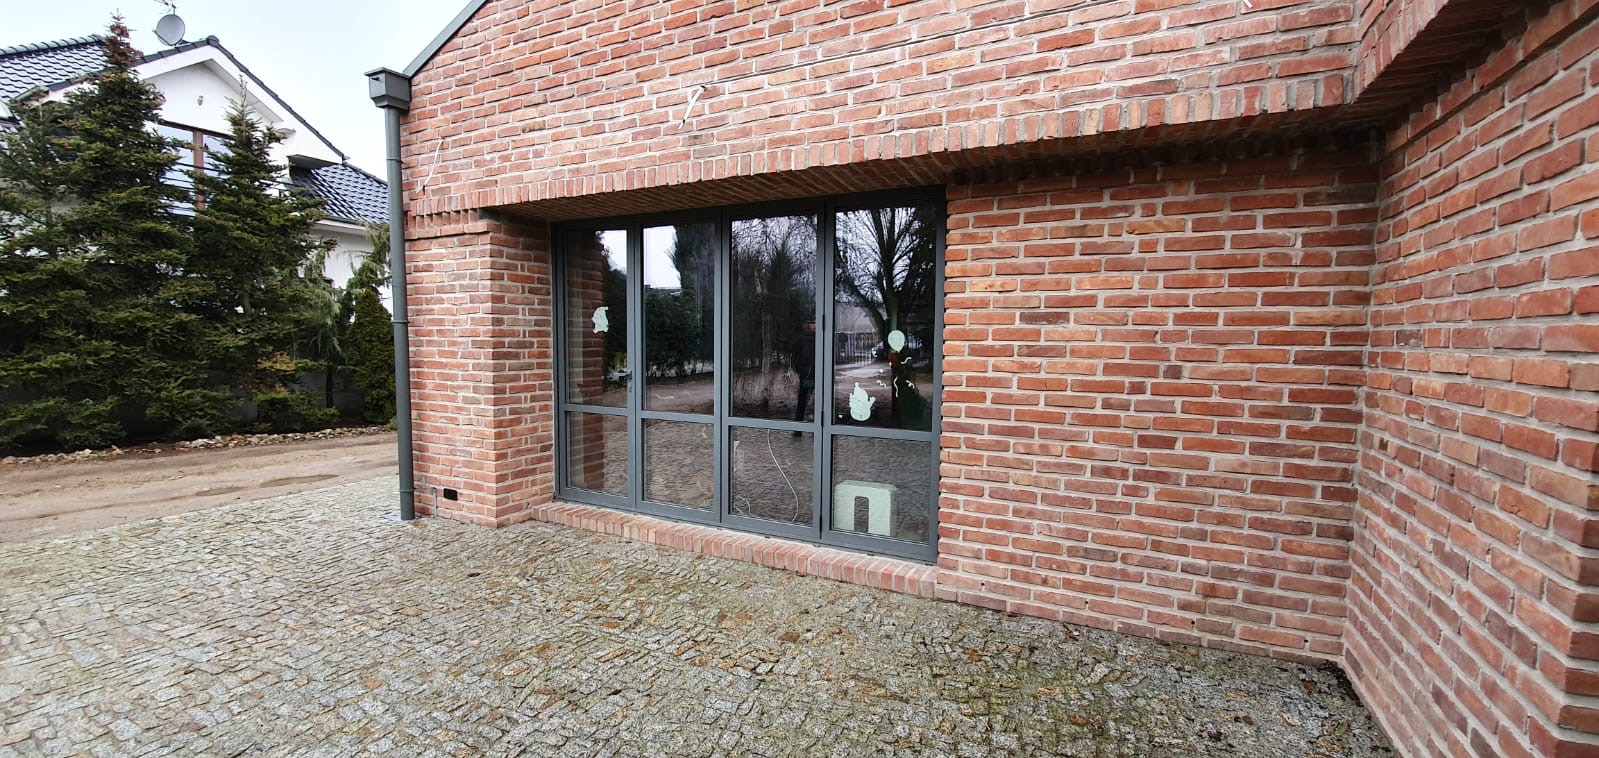 ALUMINIUM JOINERY IN COMBINATION WITH BRICKWORK